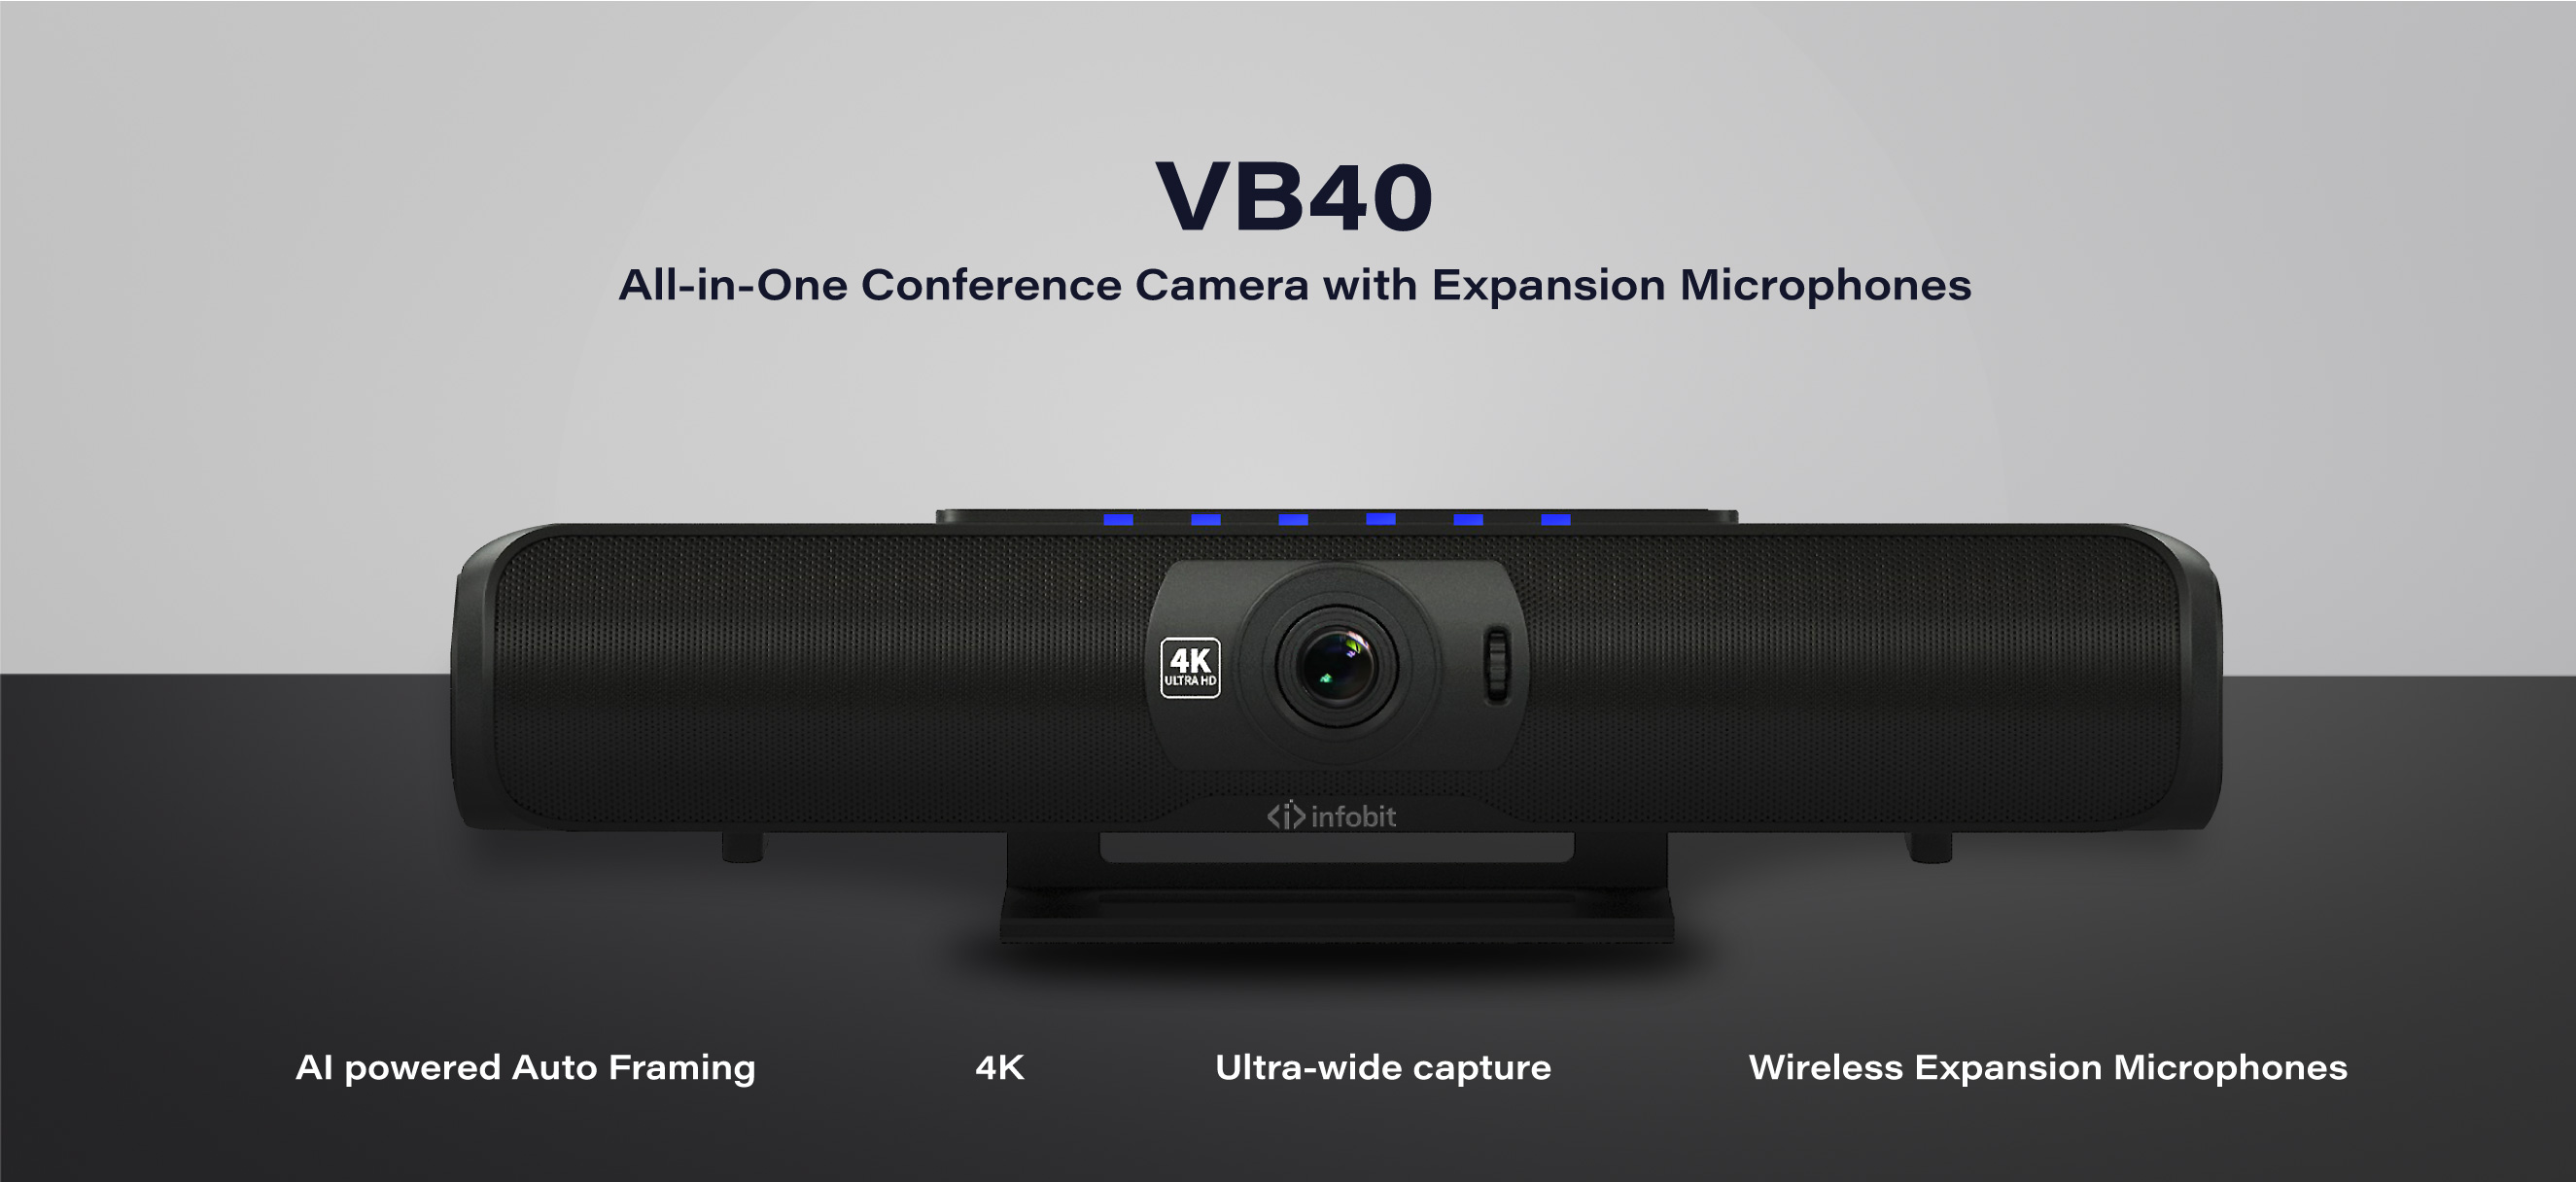 iCam VB40 All-in-One Conference Camera